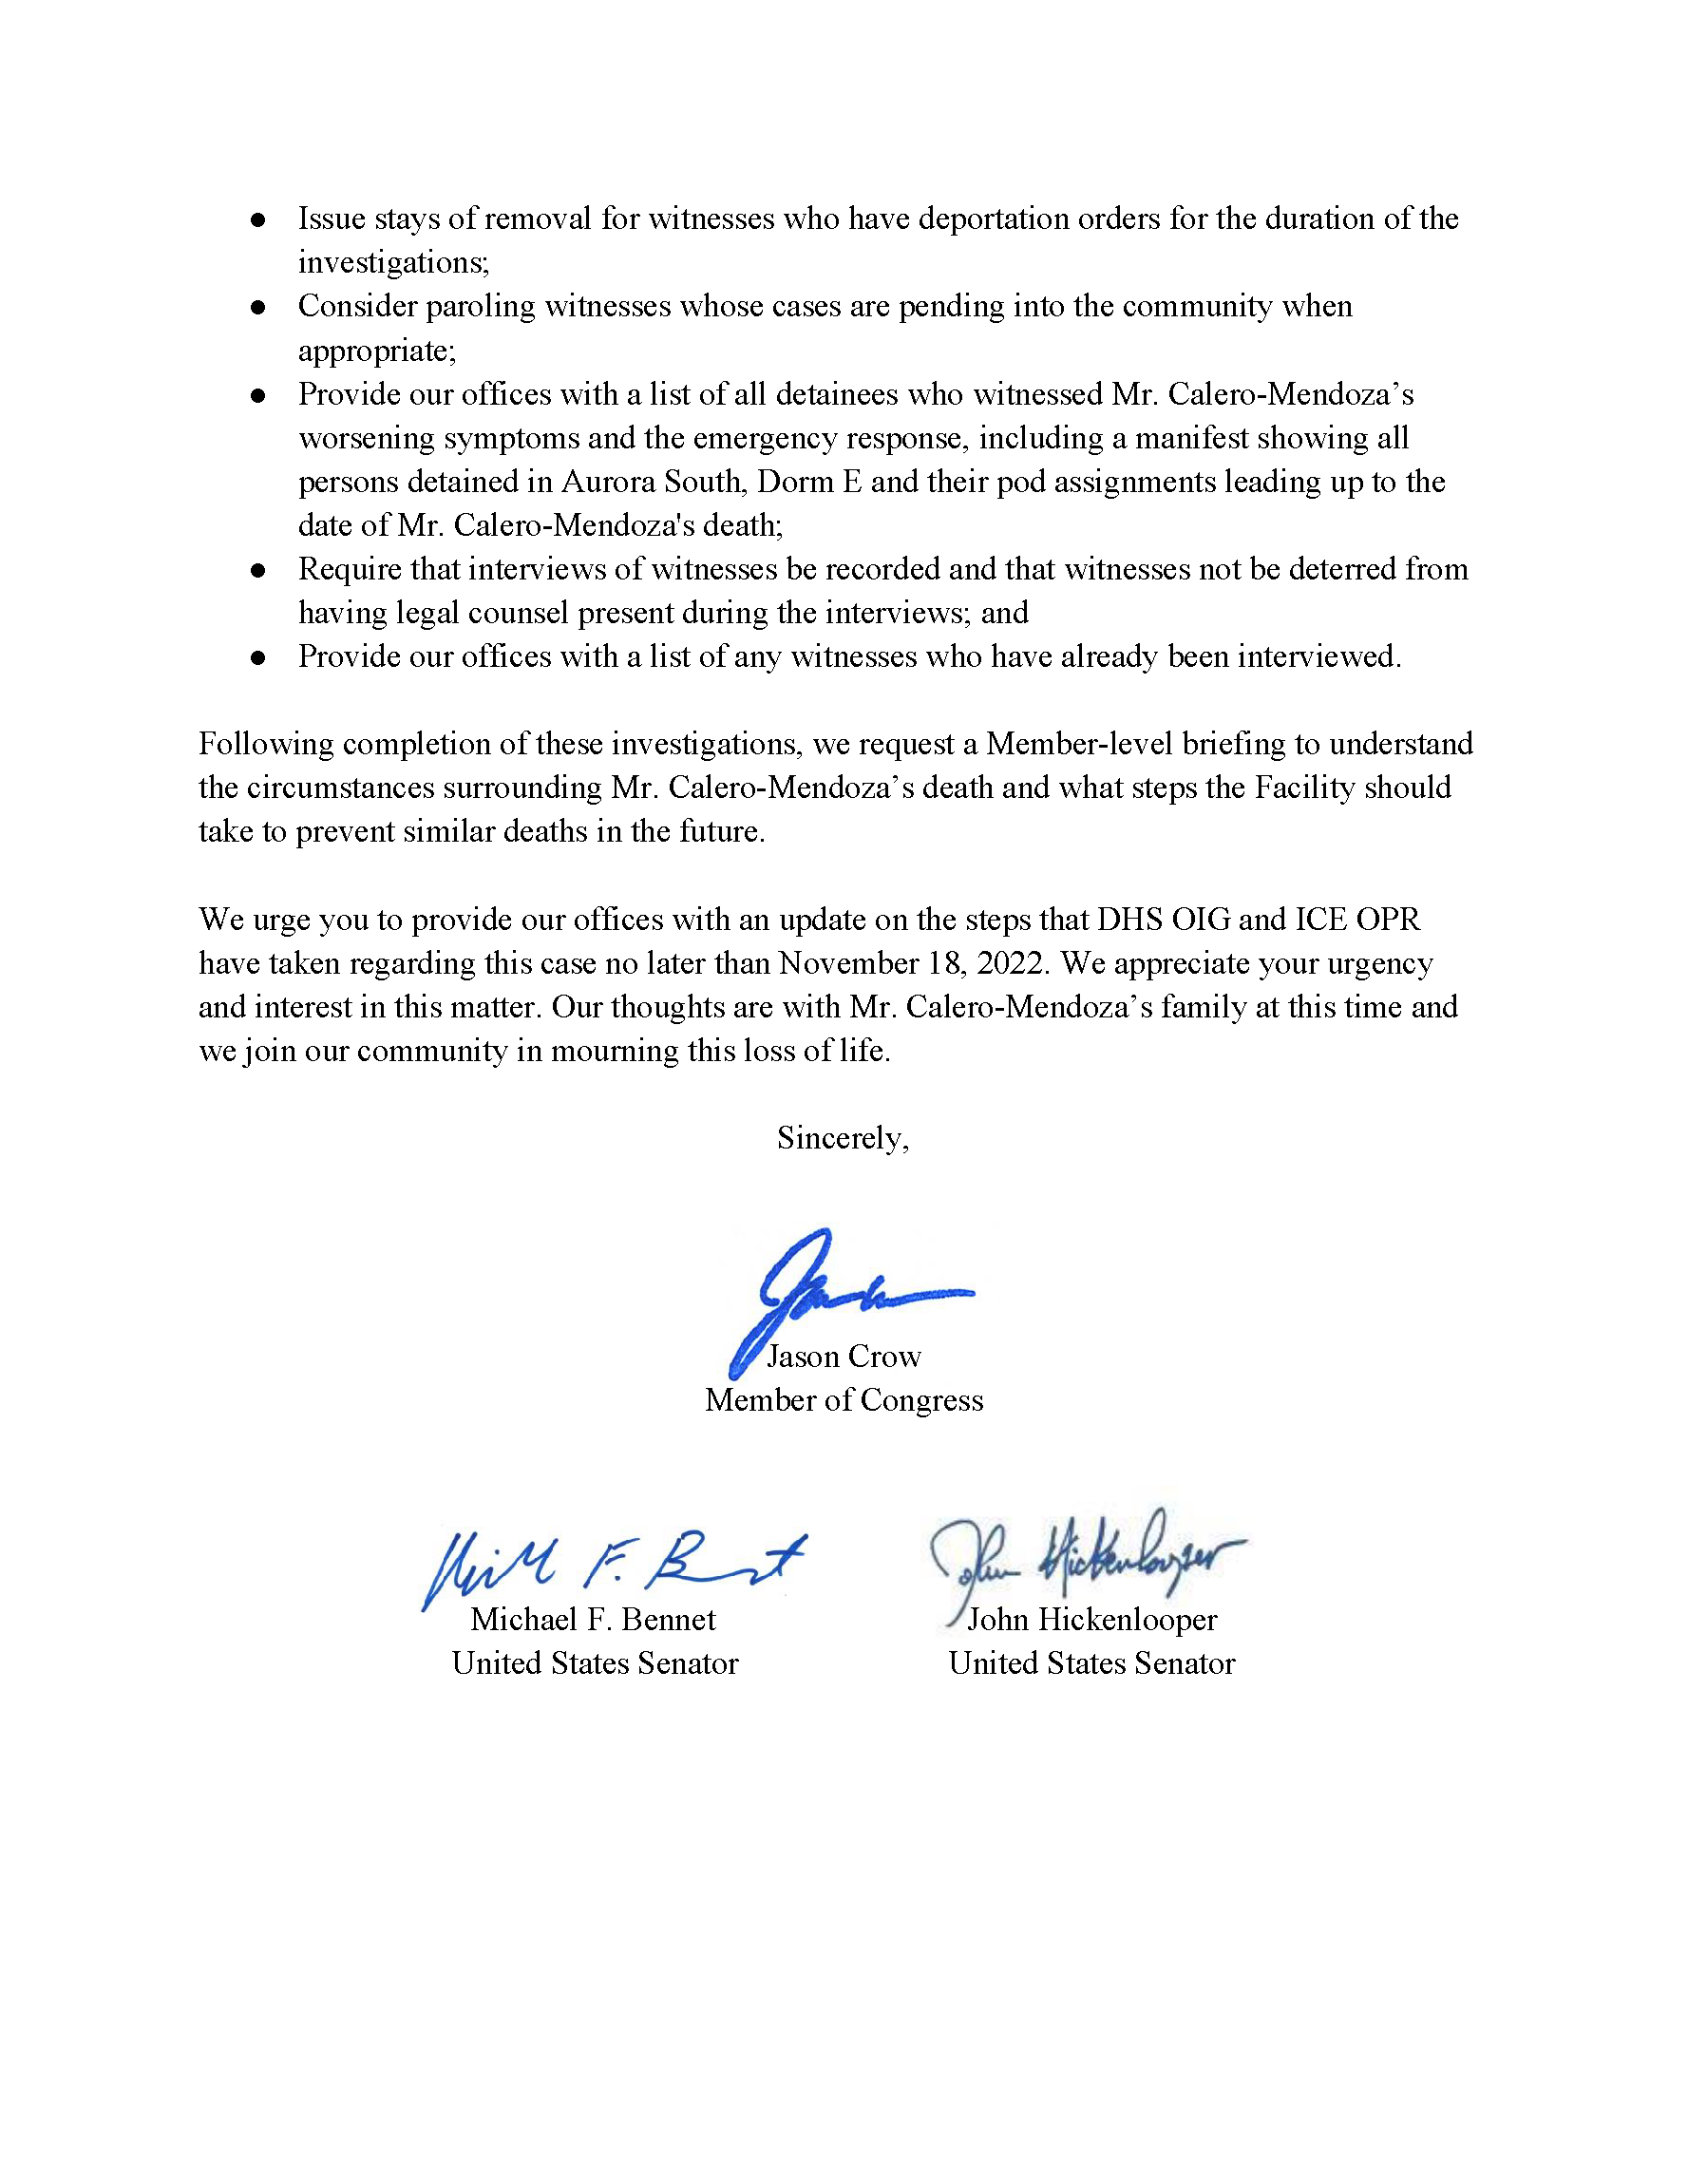 2022.10.21 FINAL ICE,DHS Letter_Page_2.png